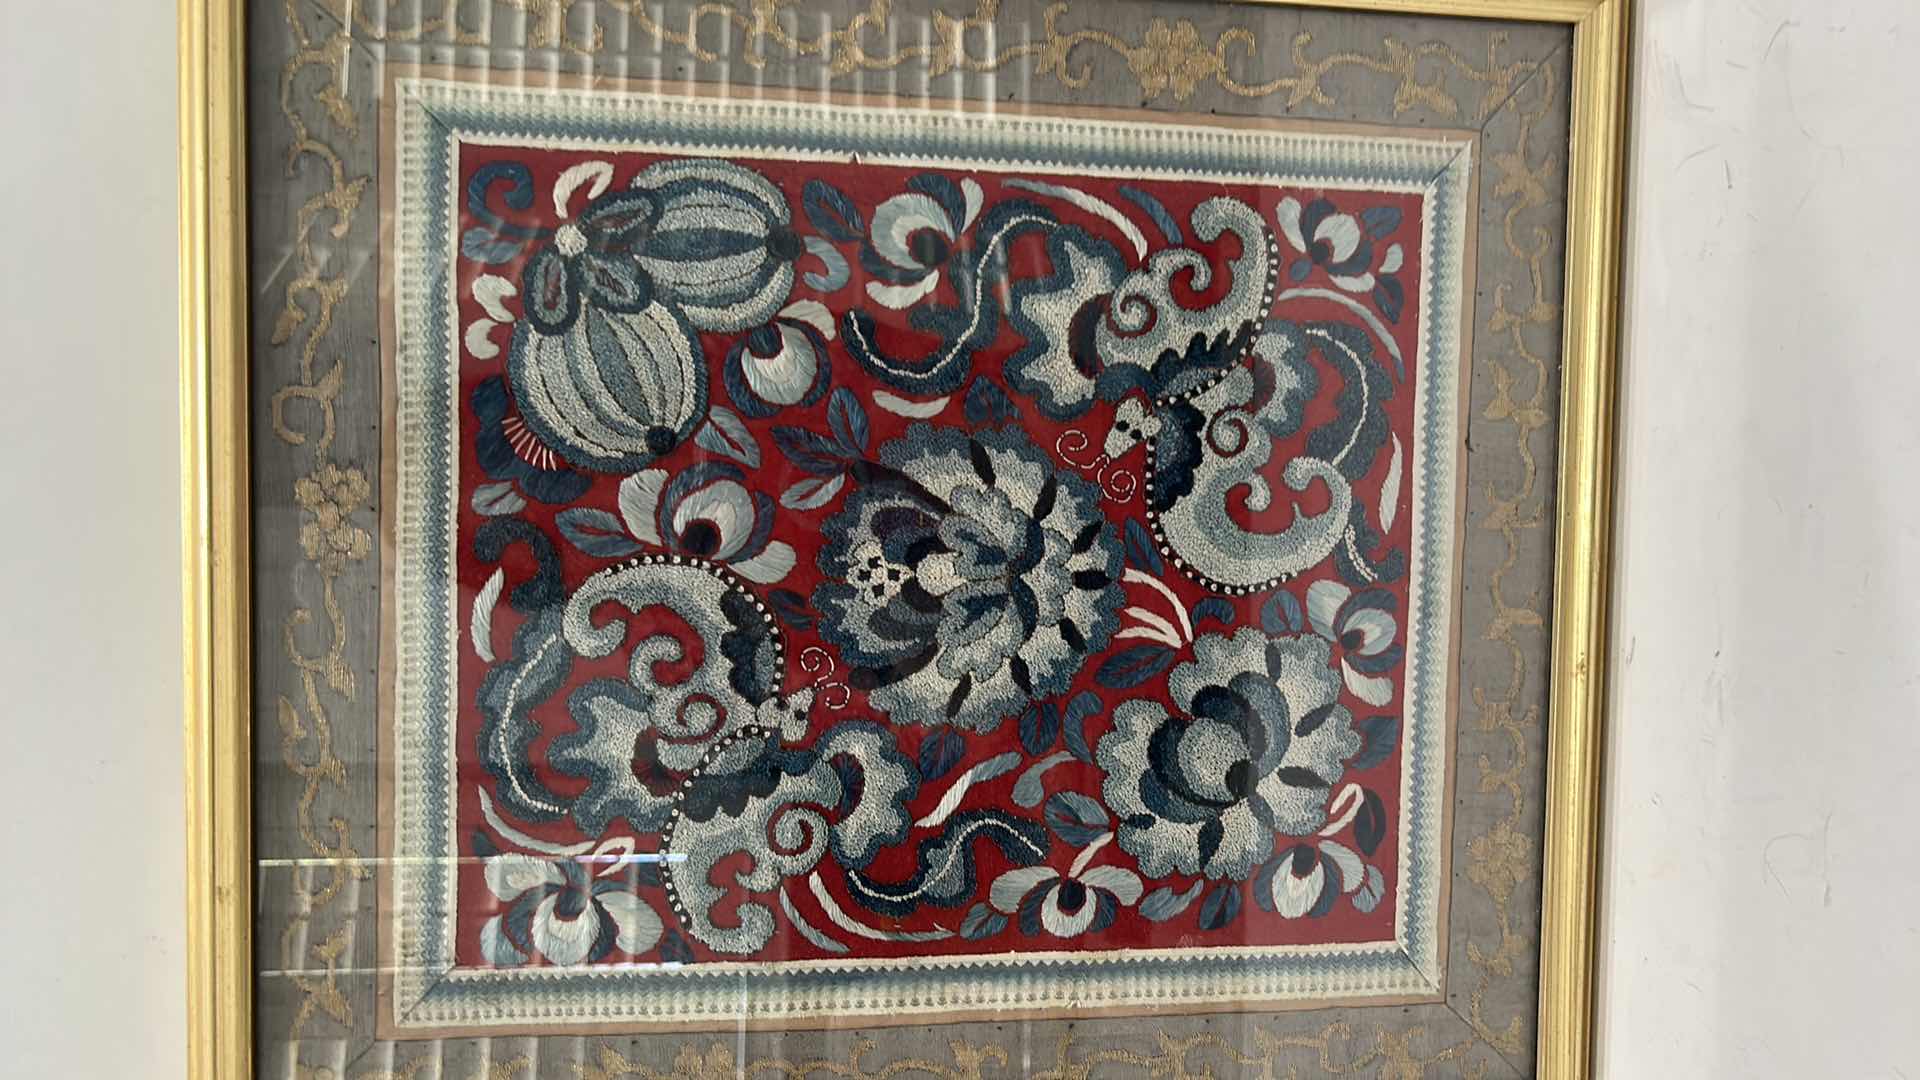 Photo 2 of 1ANTIQUE CHINESE TEXTILE FABRIC, SILK WITH SILK THREAD HAND EMBROIDERY ARTWORK FRAMED 14 1/2” x 17”4 1/2” x 17”